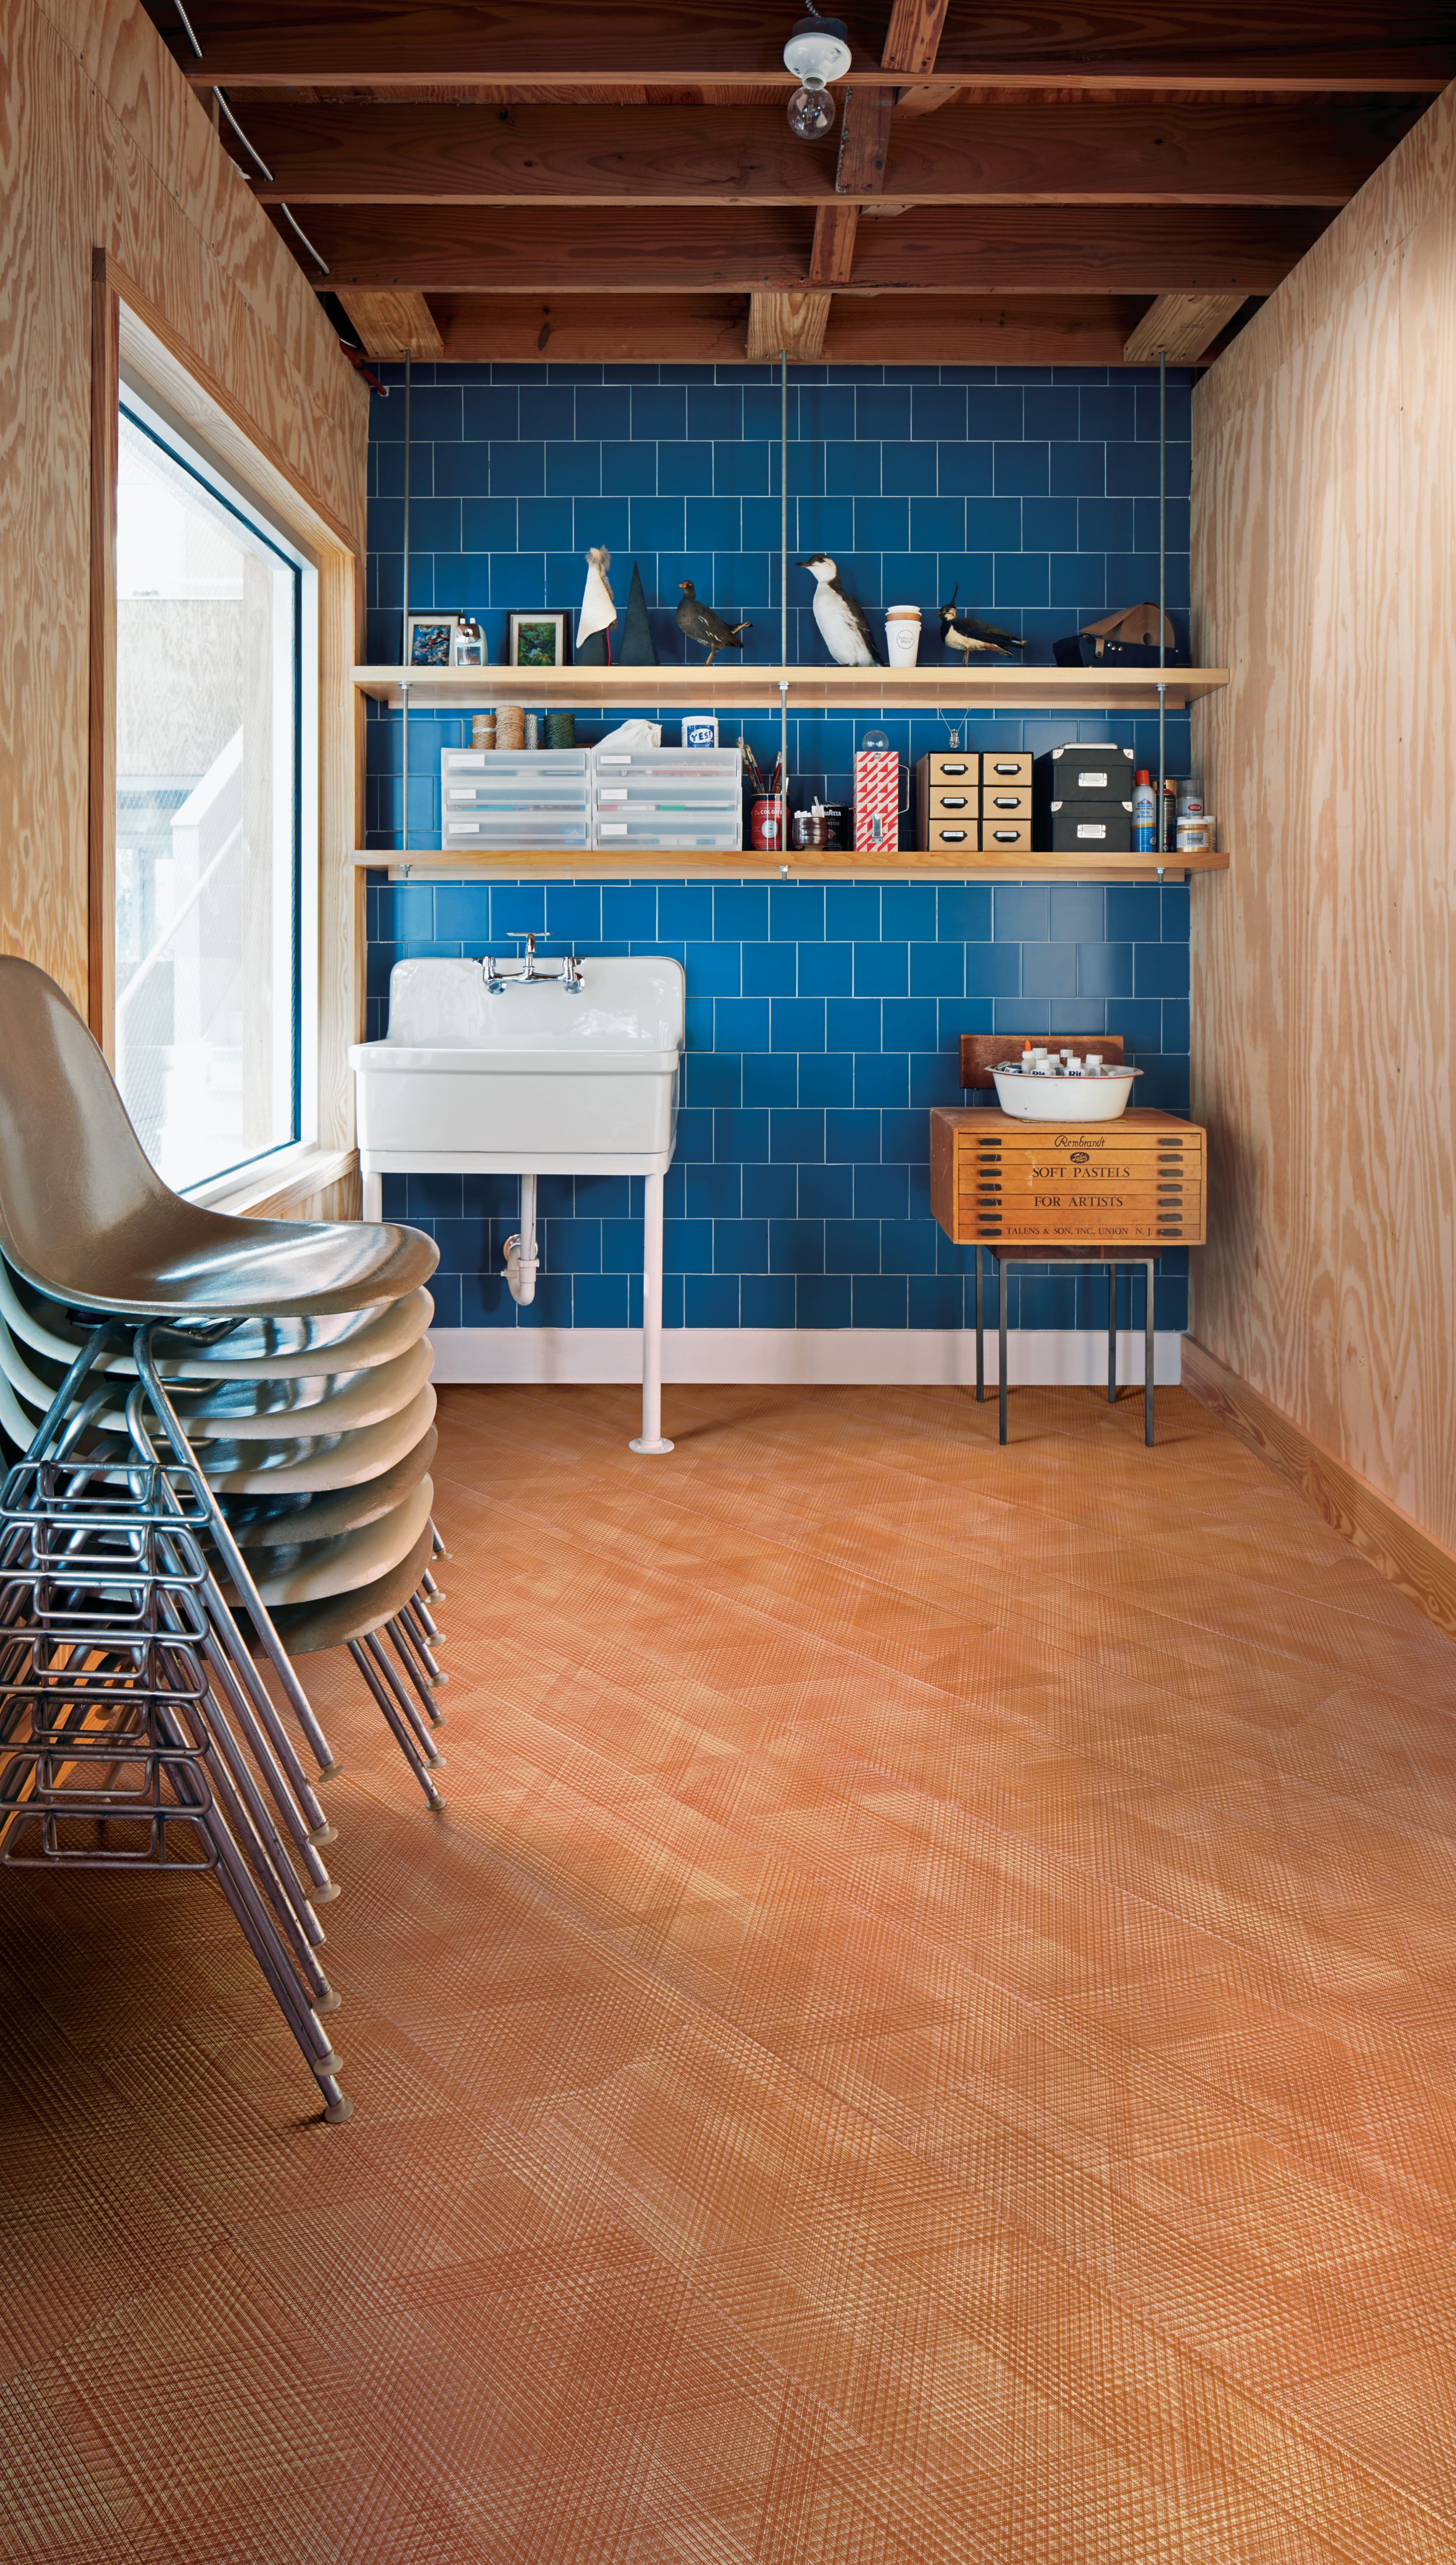 Interface Drawn Lines LVT in storage area with shelving and sink número de imagen 10